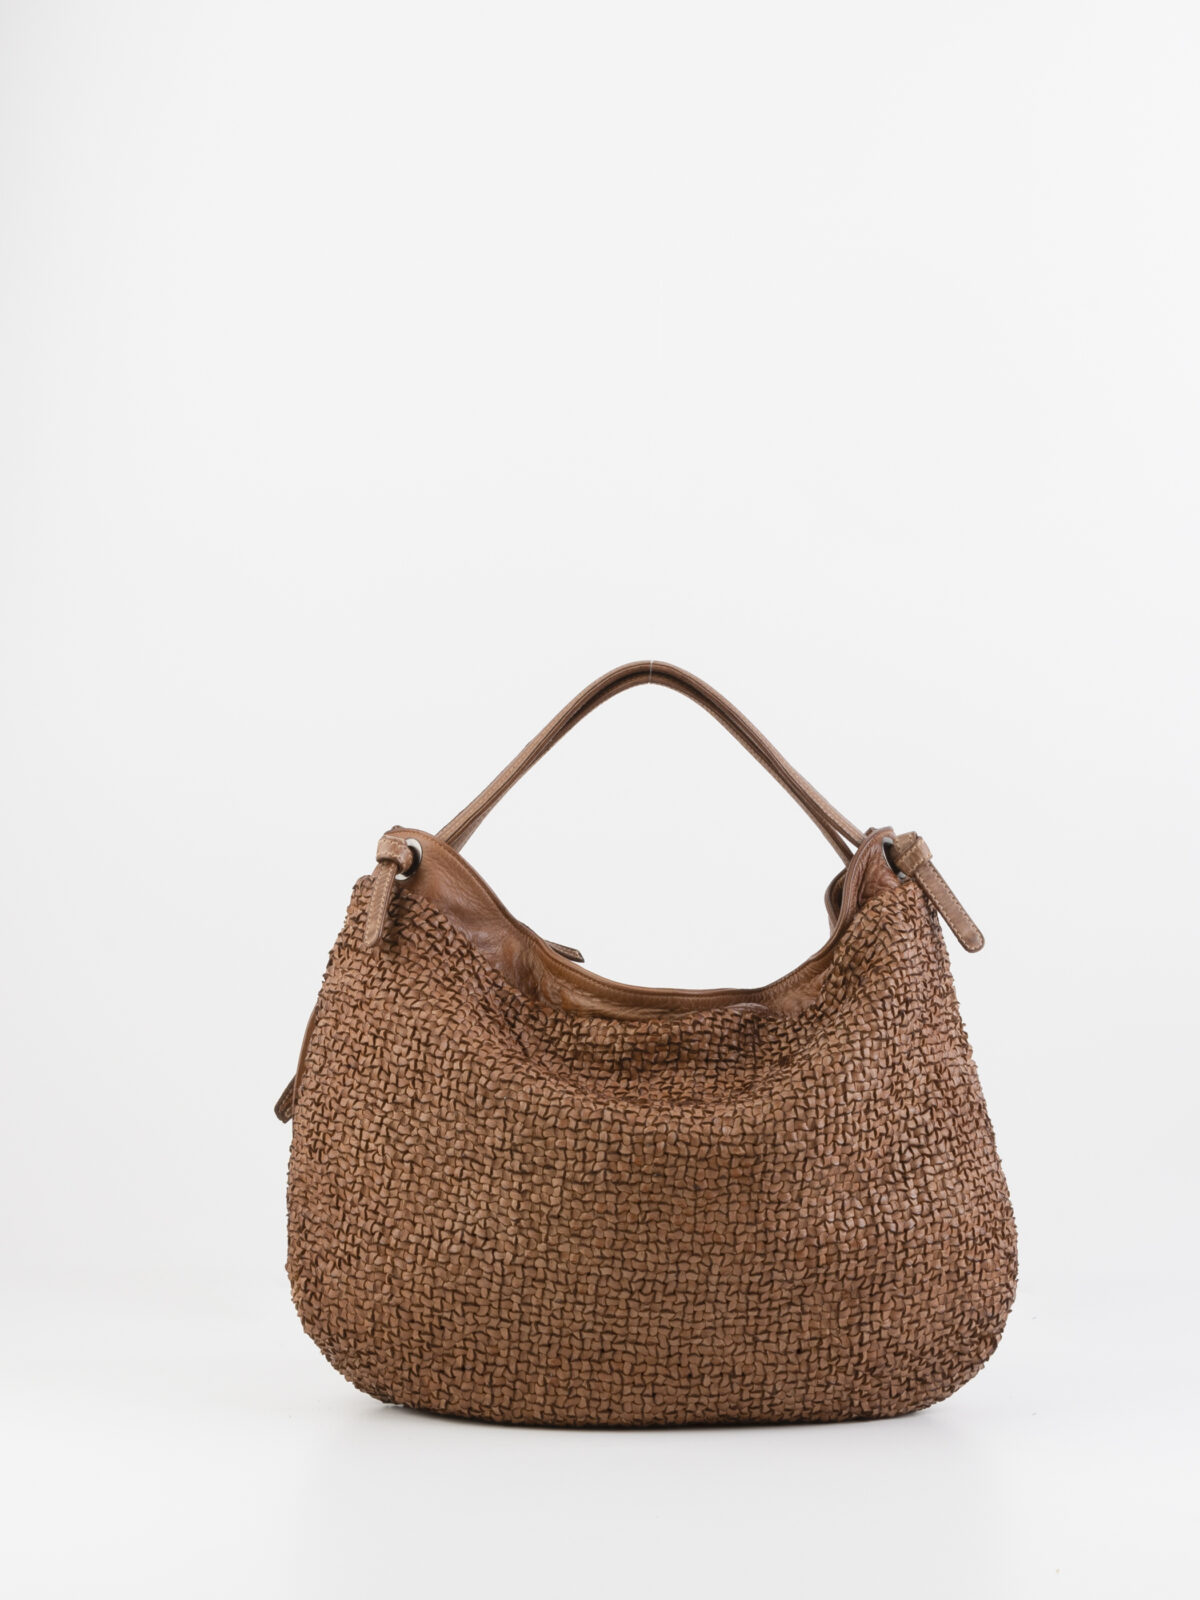 groove-leather-bag-large-shopping-tote-handmade-weaved-italian-reptiles-matchboxathens